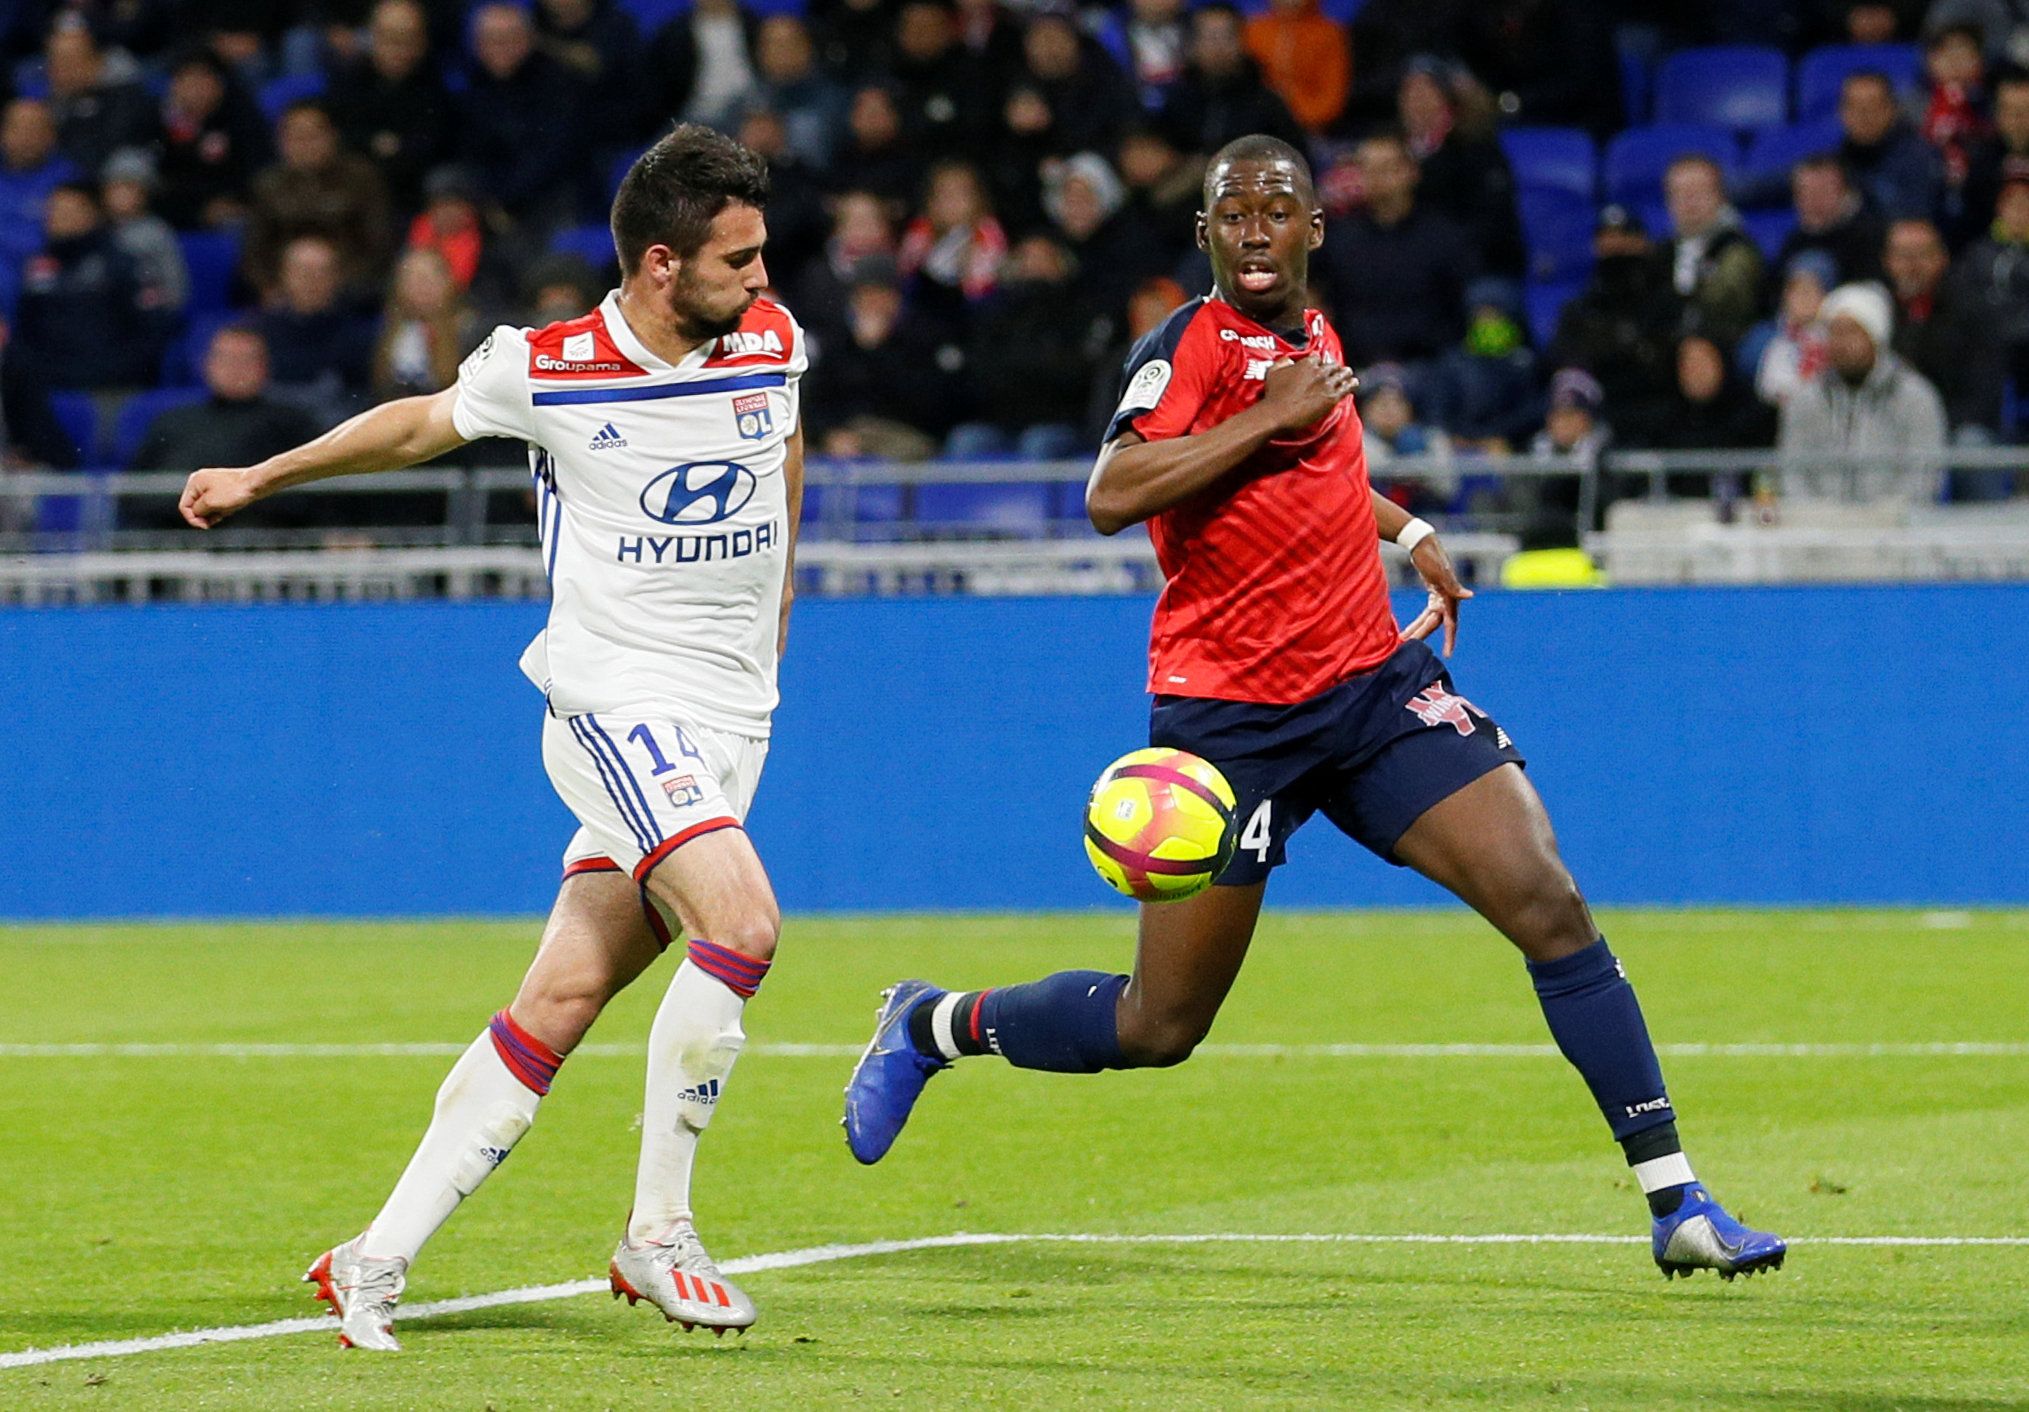 Soccer Football - Ligue 1 - Olympique Lyonnais v Lille - Groupama Stadium, Lyon, France - May 5, 2019   Lille's Boubakary Soumare in action before scoring their second goal            REUTERS/Emmanuel Foudrot